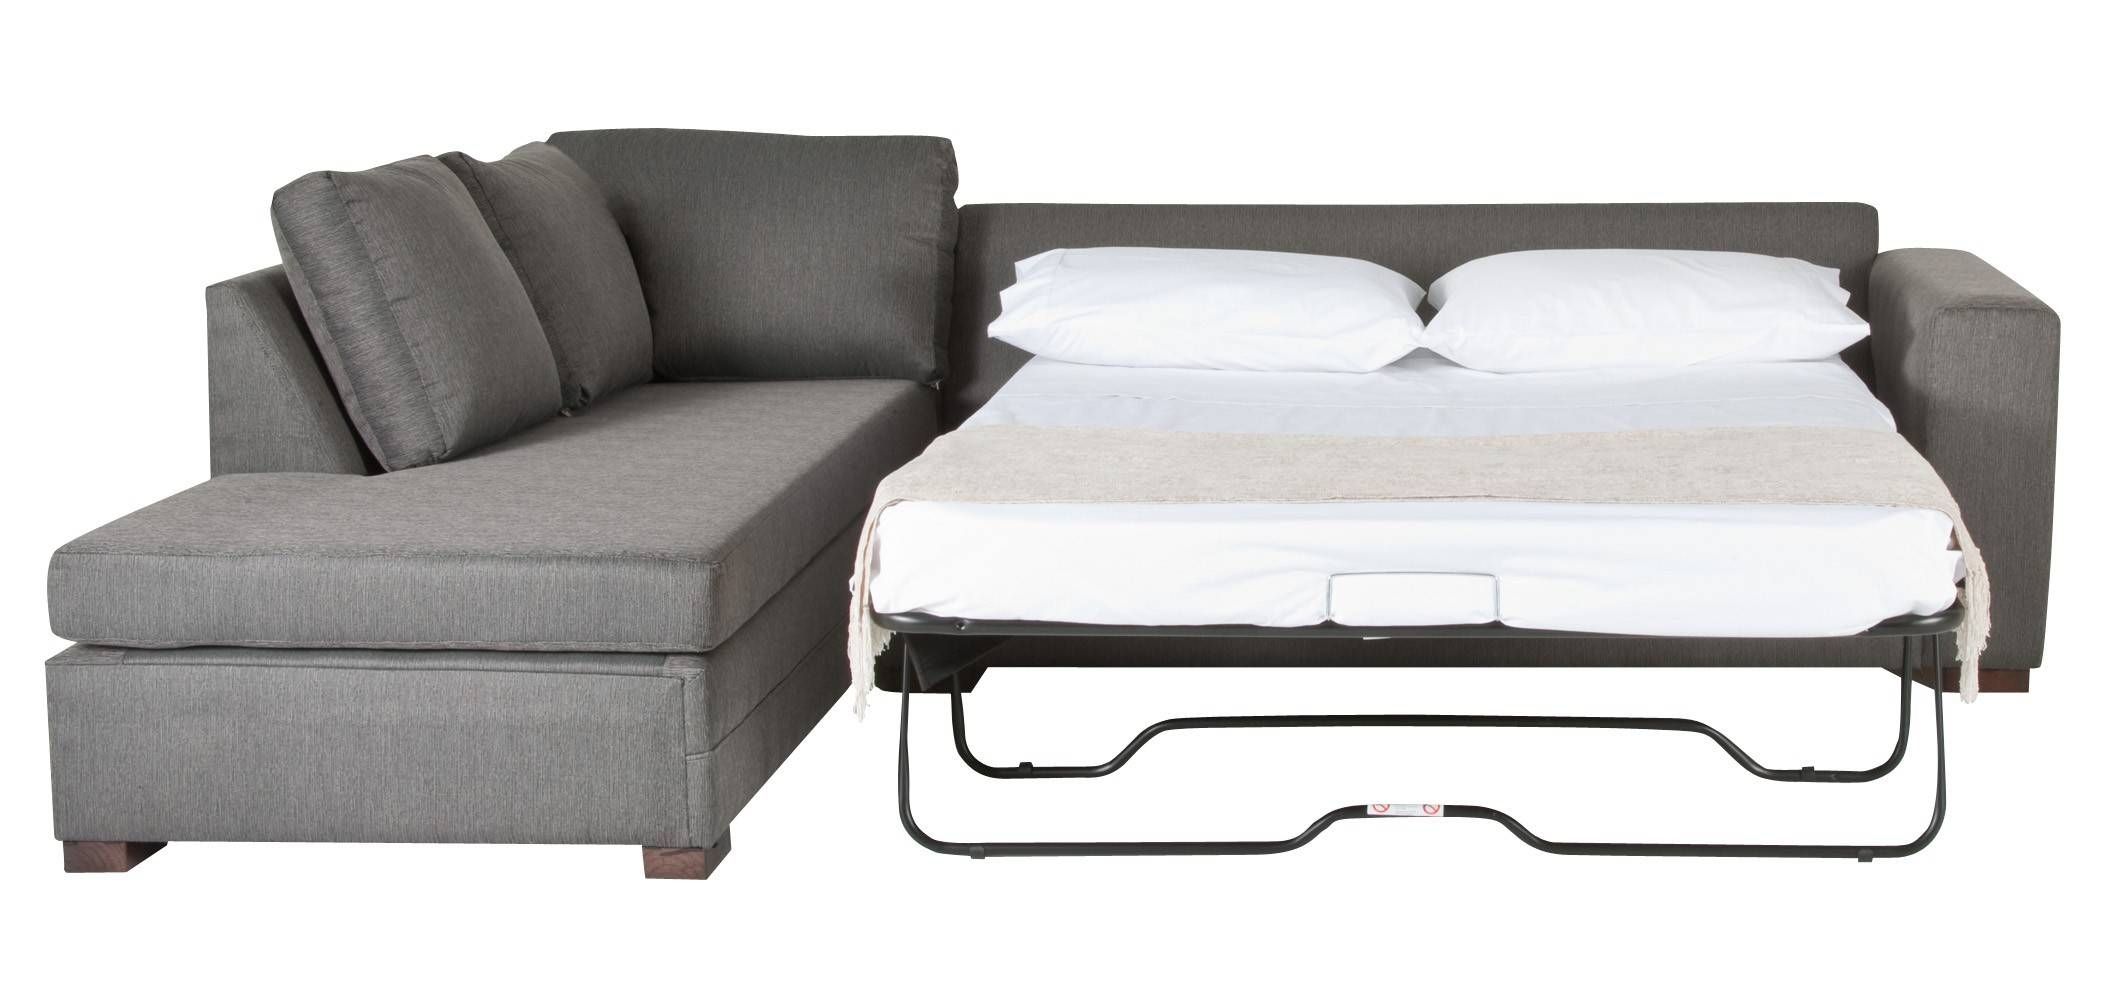 sheets for pull out sofa bed